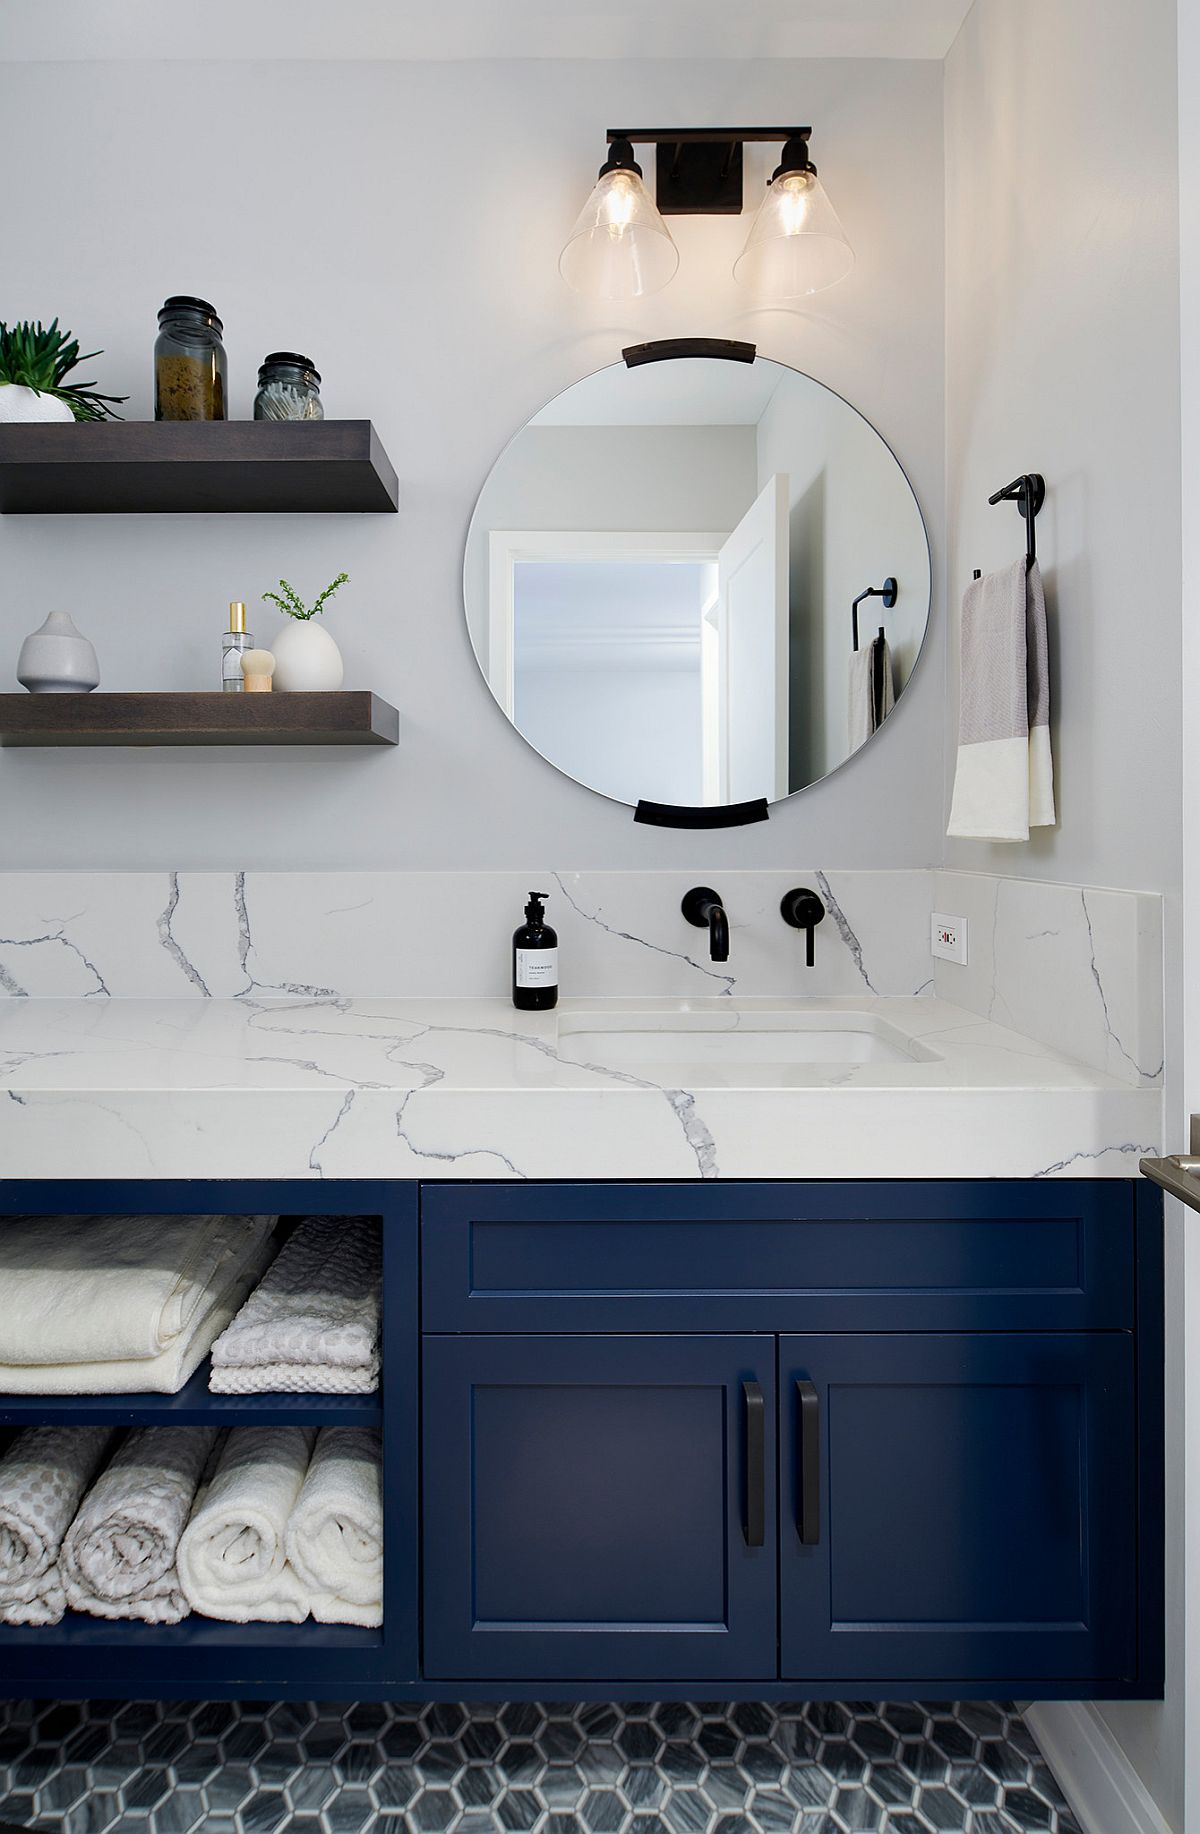 White-countertops-walls-and-lovely-lighting-accentuate-the-appeal-of-the-dark-blue-vanity-28944